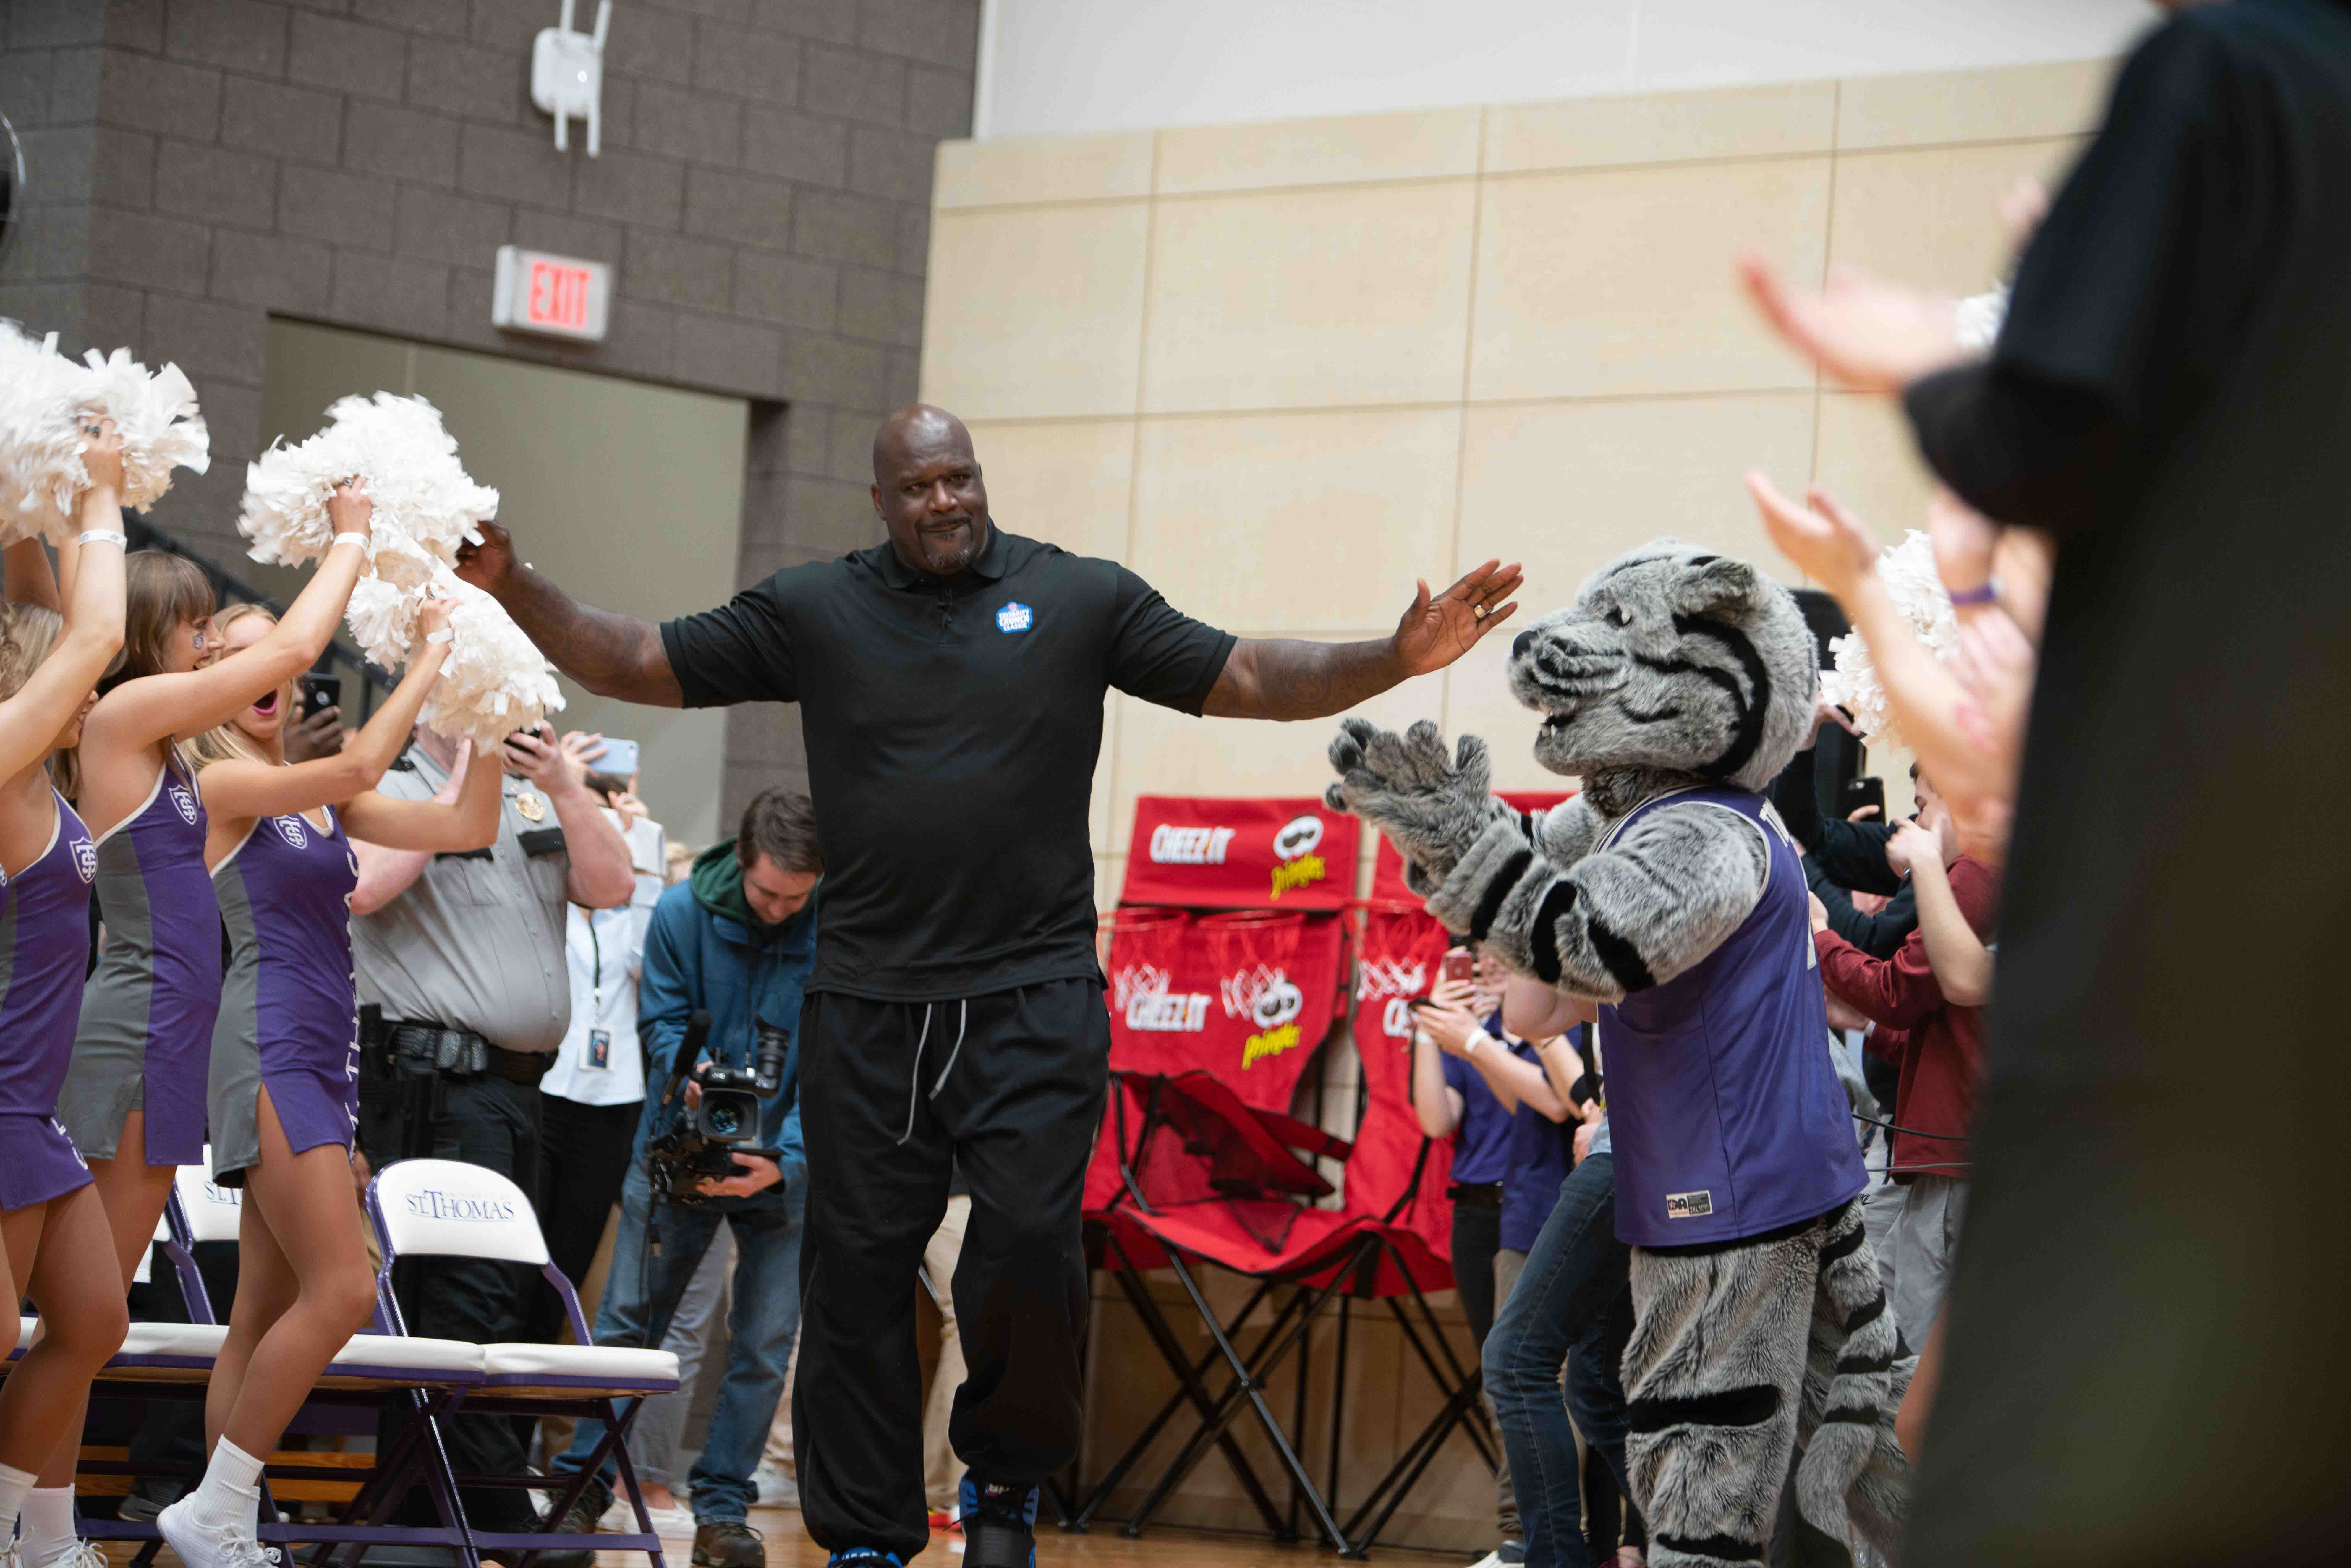 Shaquille O'Neal high fiving St. Ҵý fans